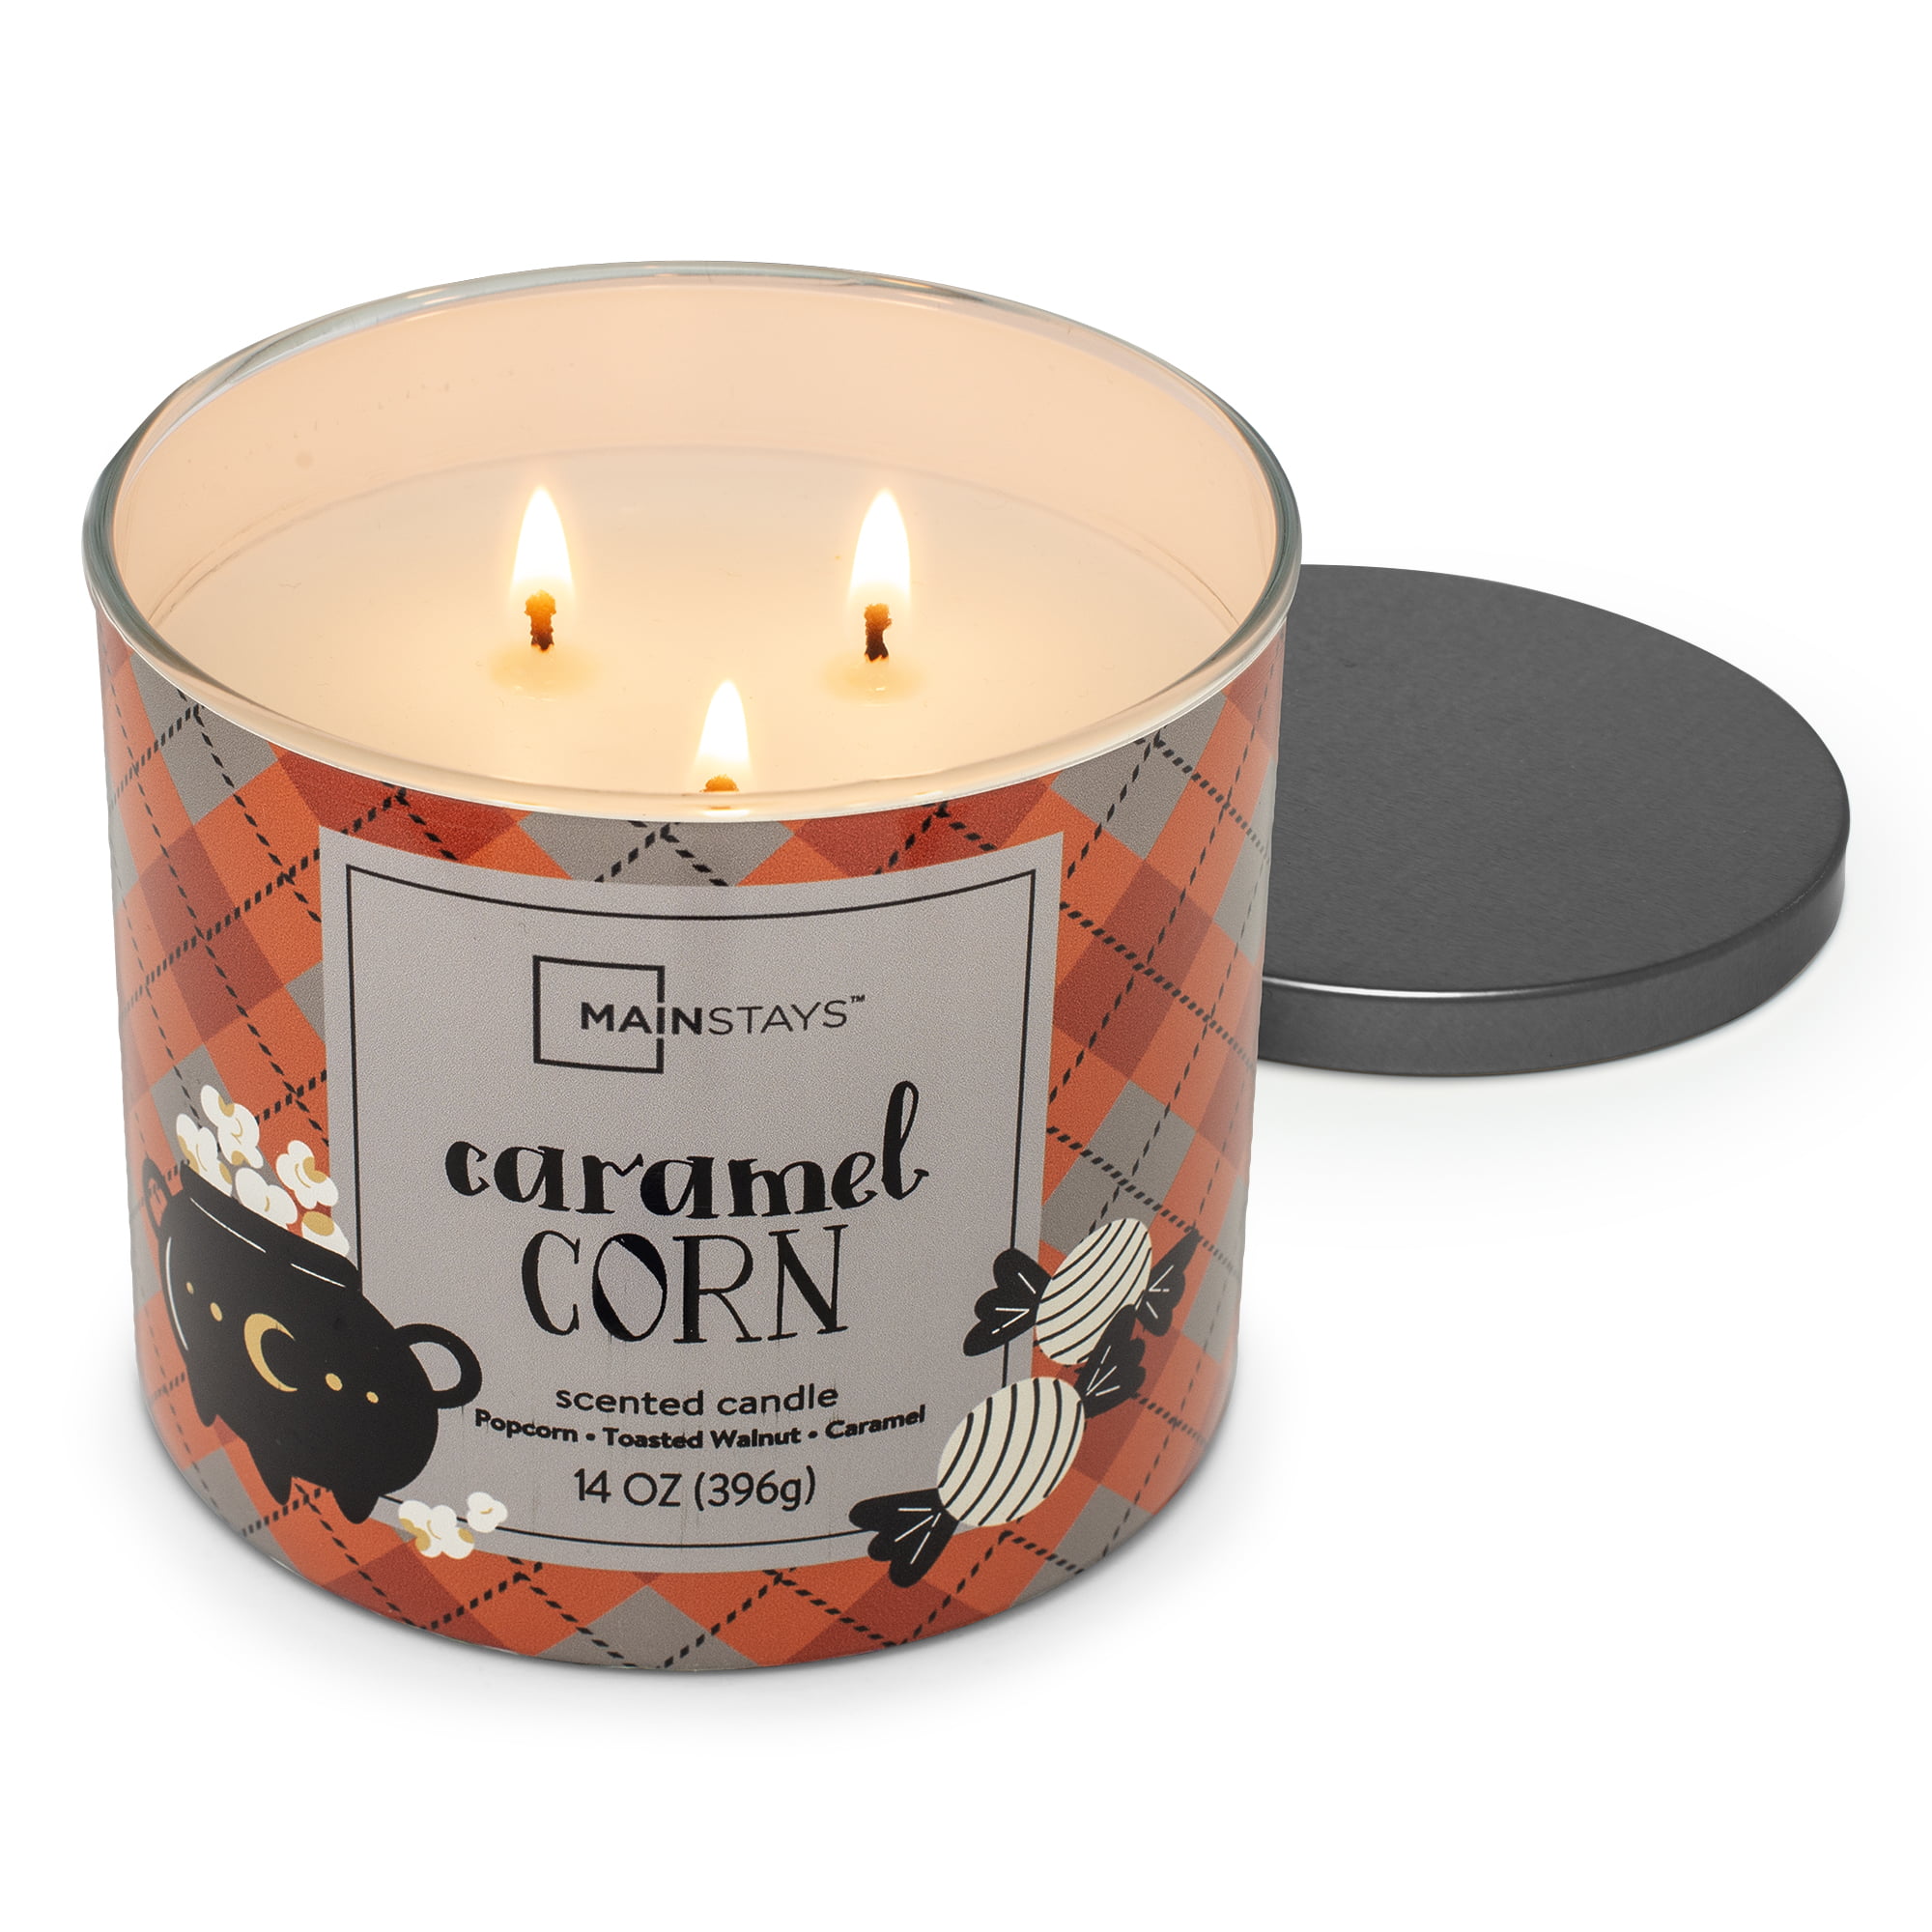 These fall-scented candles make your home tacky and basic — try